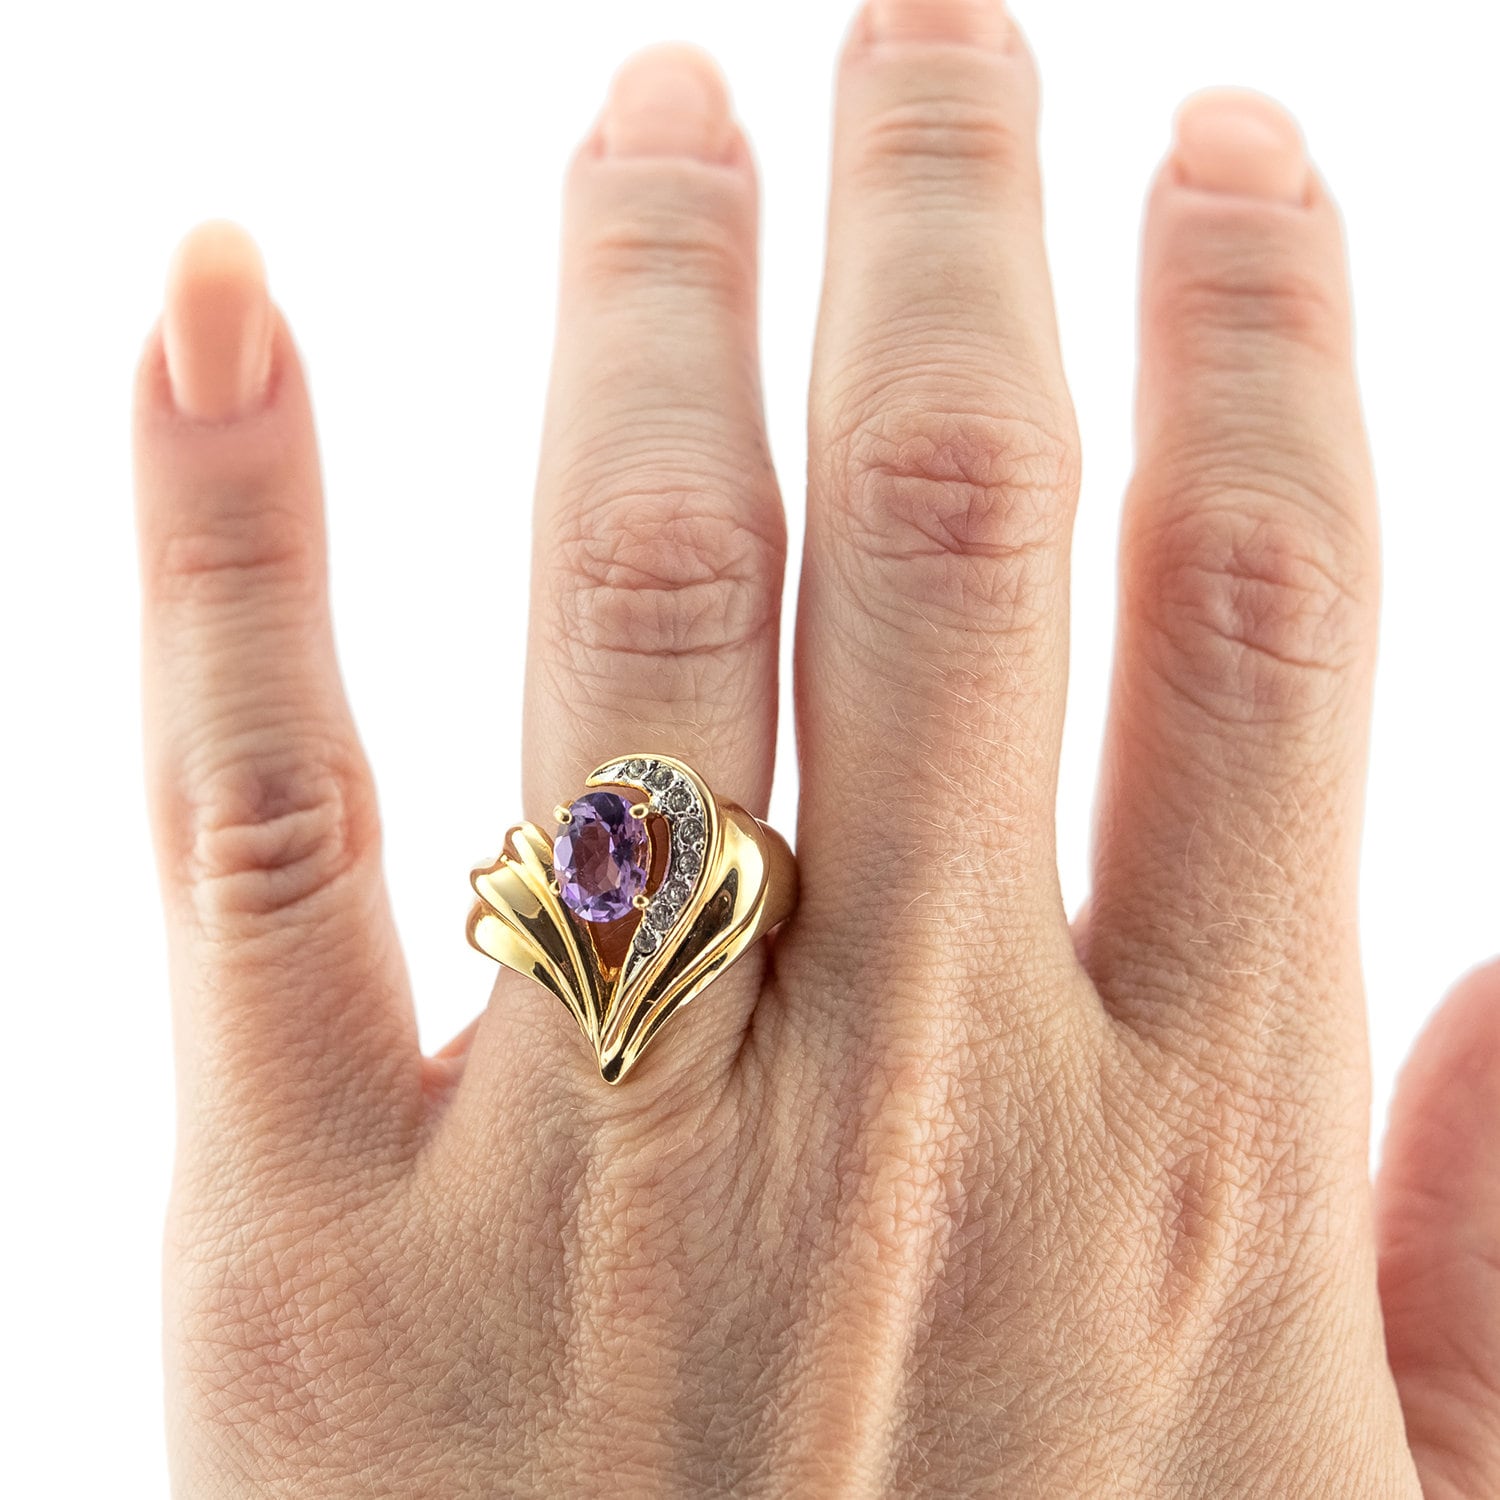 Vintage Ring Genuine Amethyst and Clear Swarovski Crystals 18kt Gold Plated R2734 - Limited Stock - Never Worn